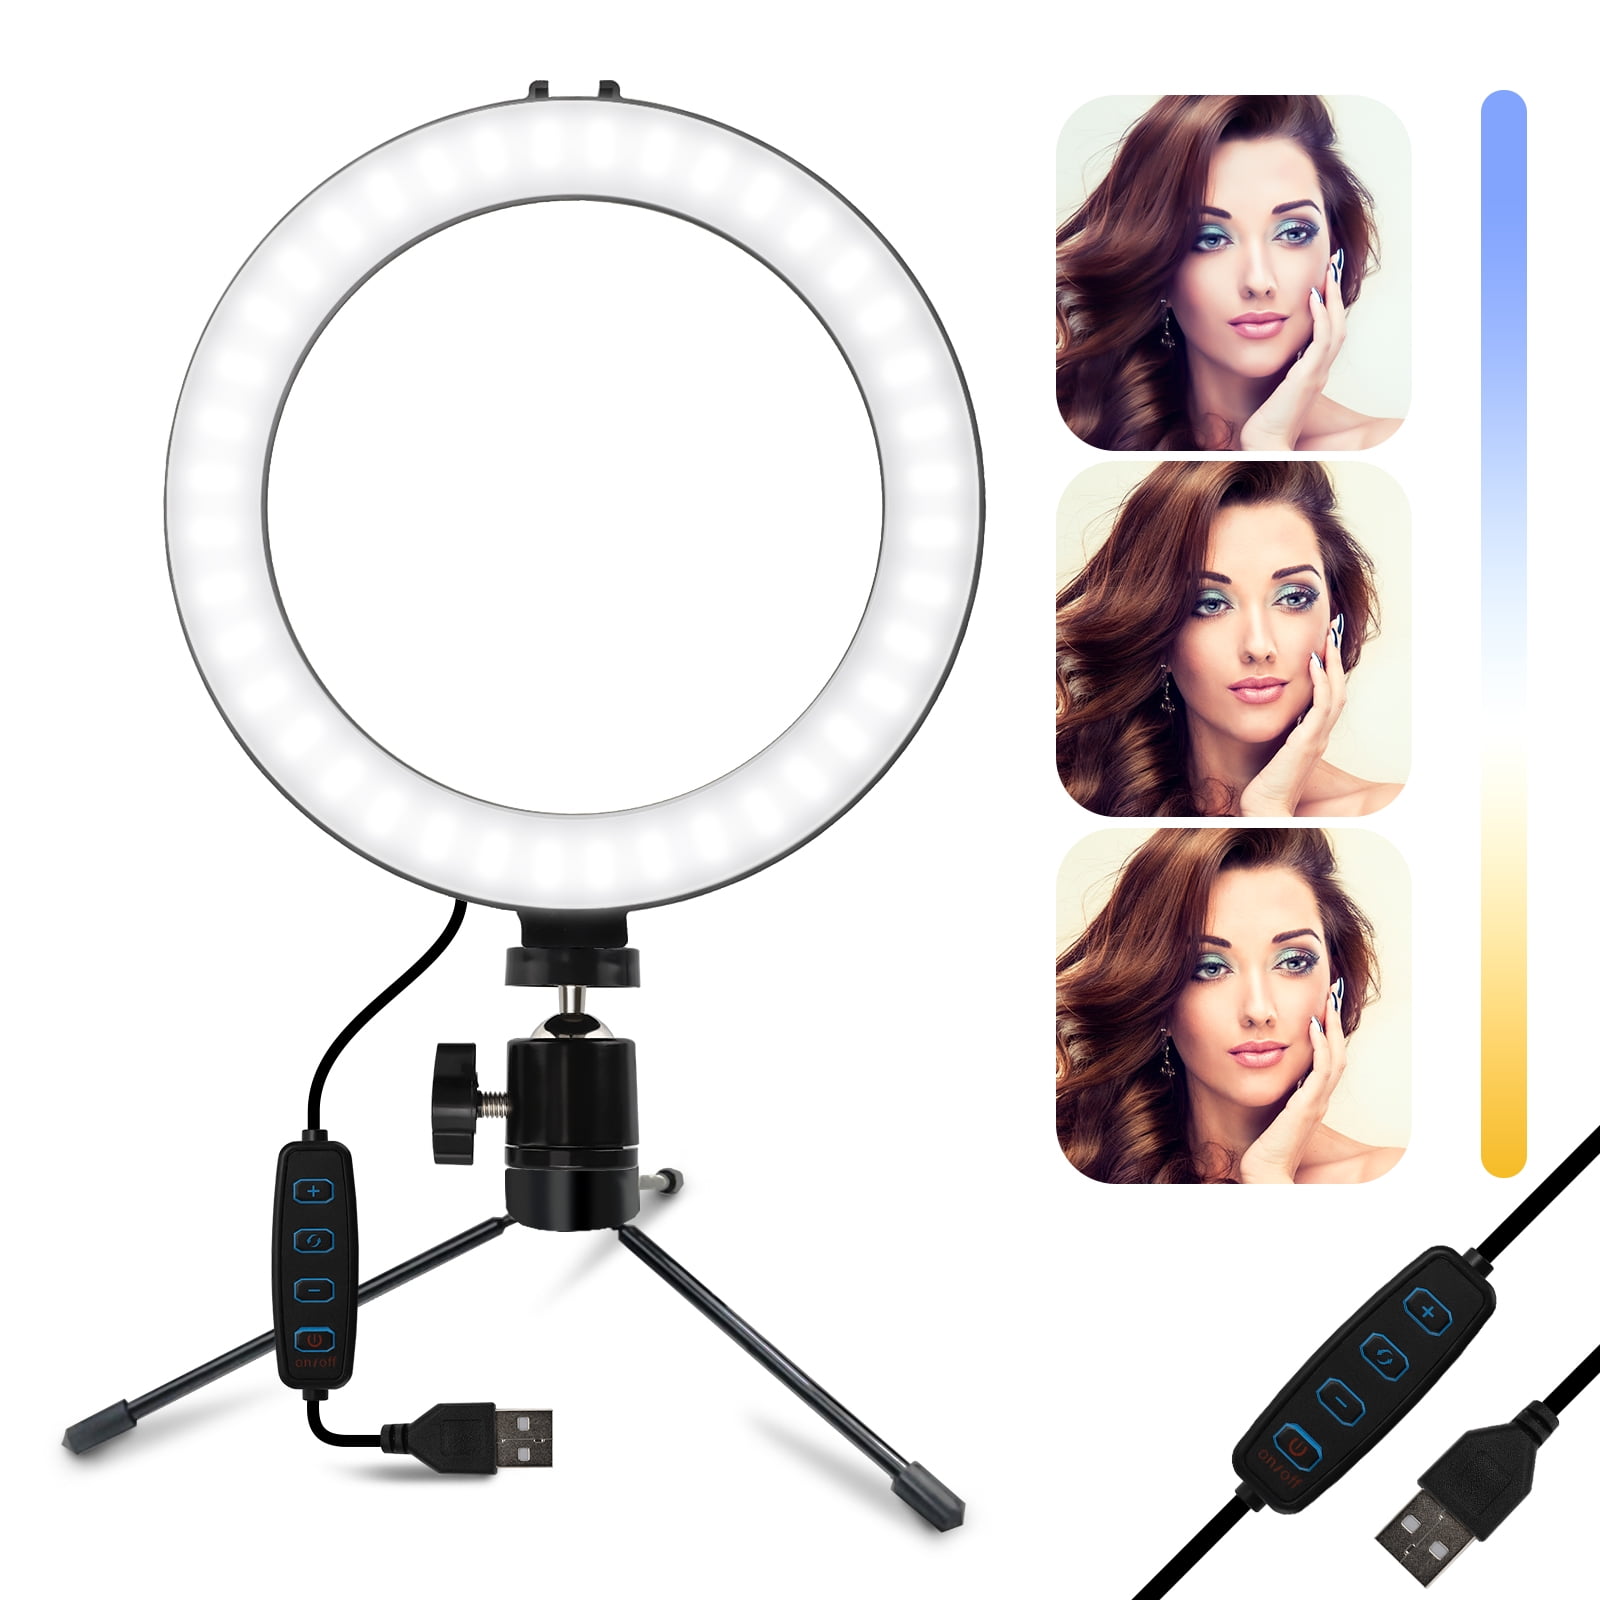 Mirror Yidoblo18 Dimmable Fluorescent Ring Light Kit: 96W 5500K Ring Light Light Stand Soft Tube Filter and Bag for Photography YouTube Self Video Make-up 